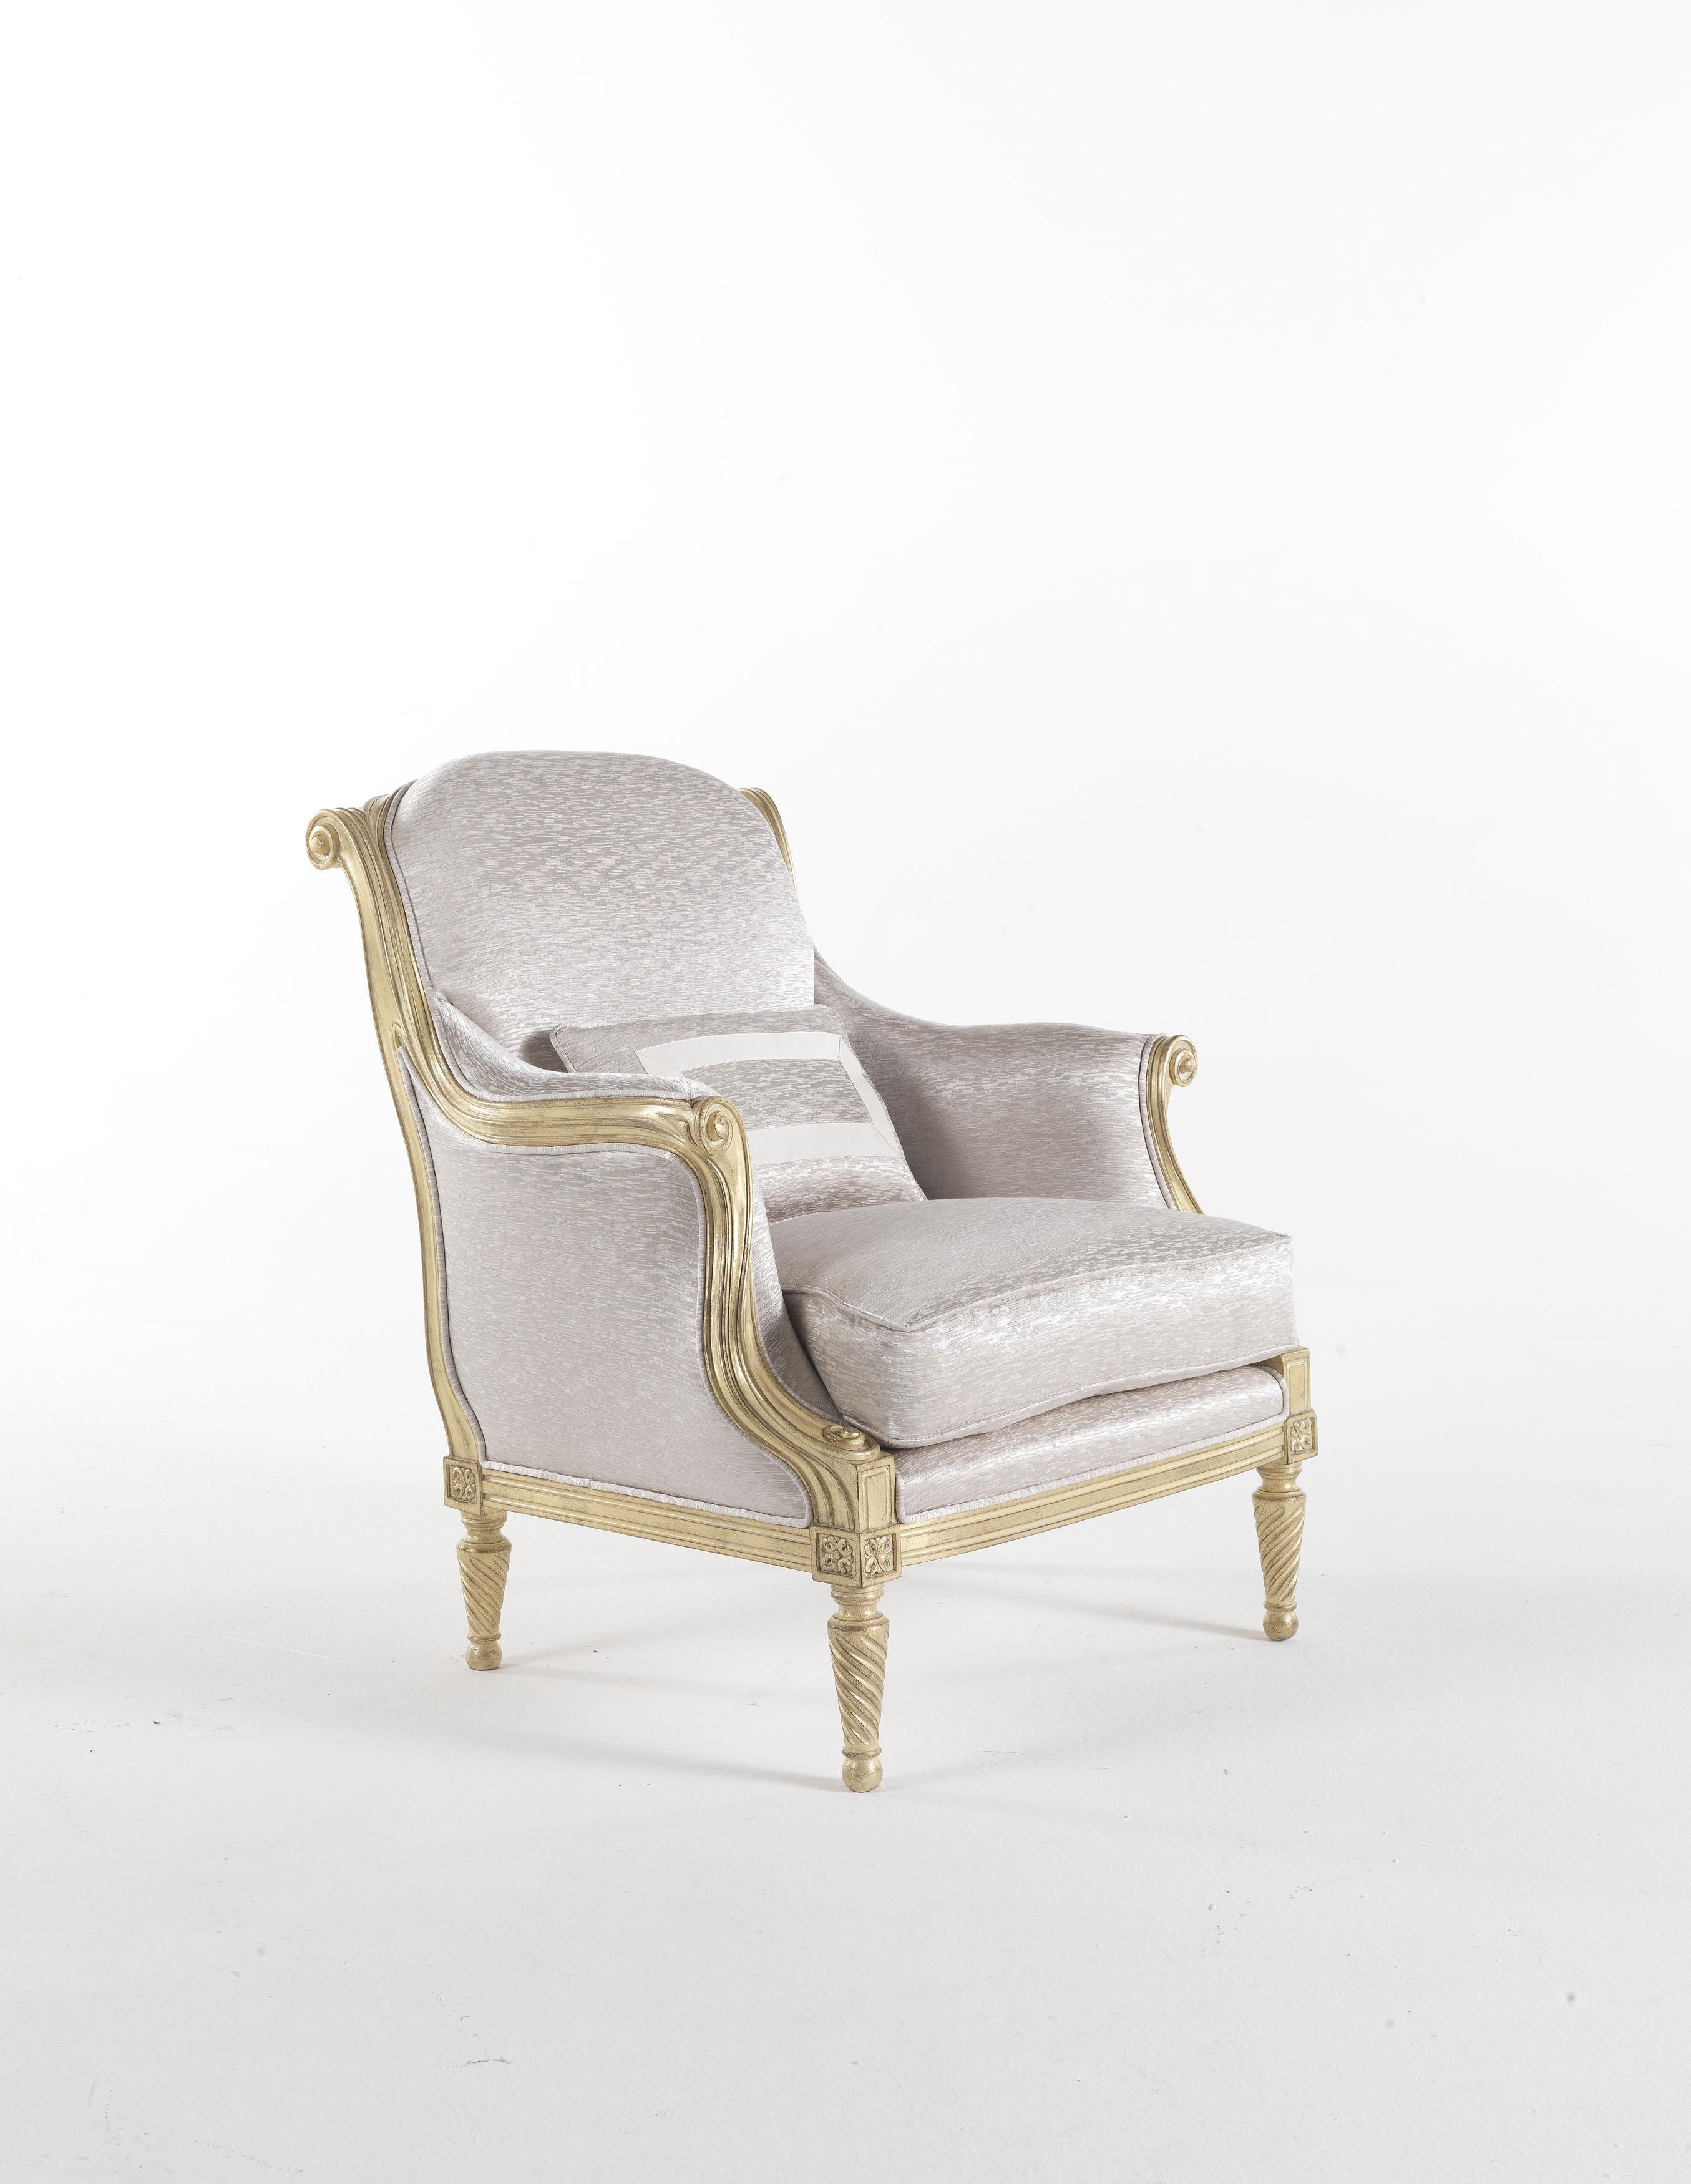 Sweet curves that start from the feet and spirals that, without interruption, reach the backrest creating through their movements a graceful chair with delicate and thin armrests. The refined elegance of Rebecca is expressed within the choice of a